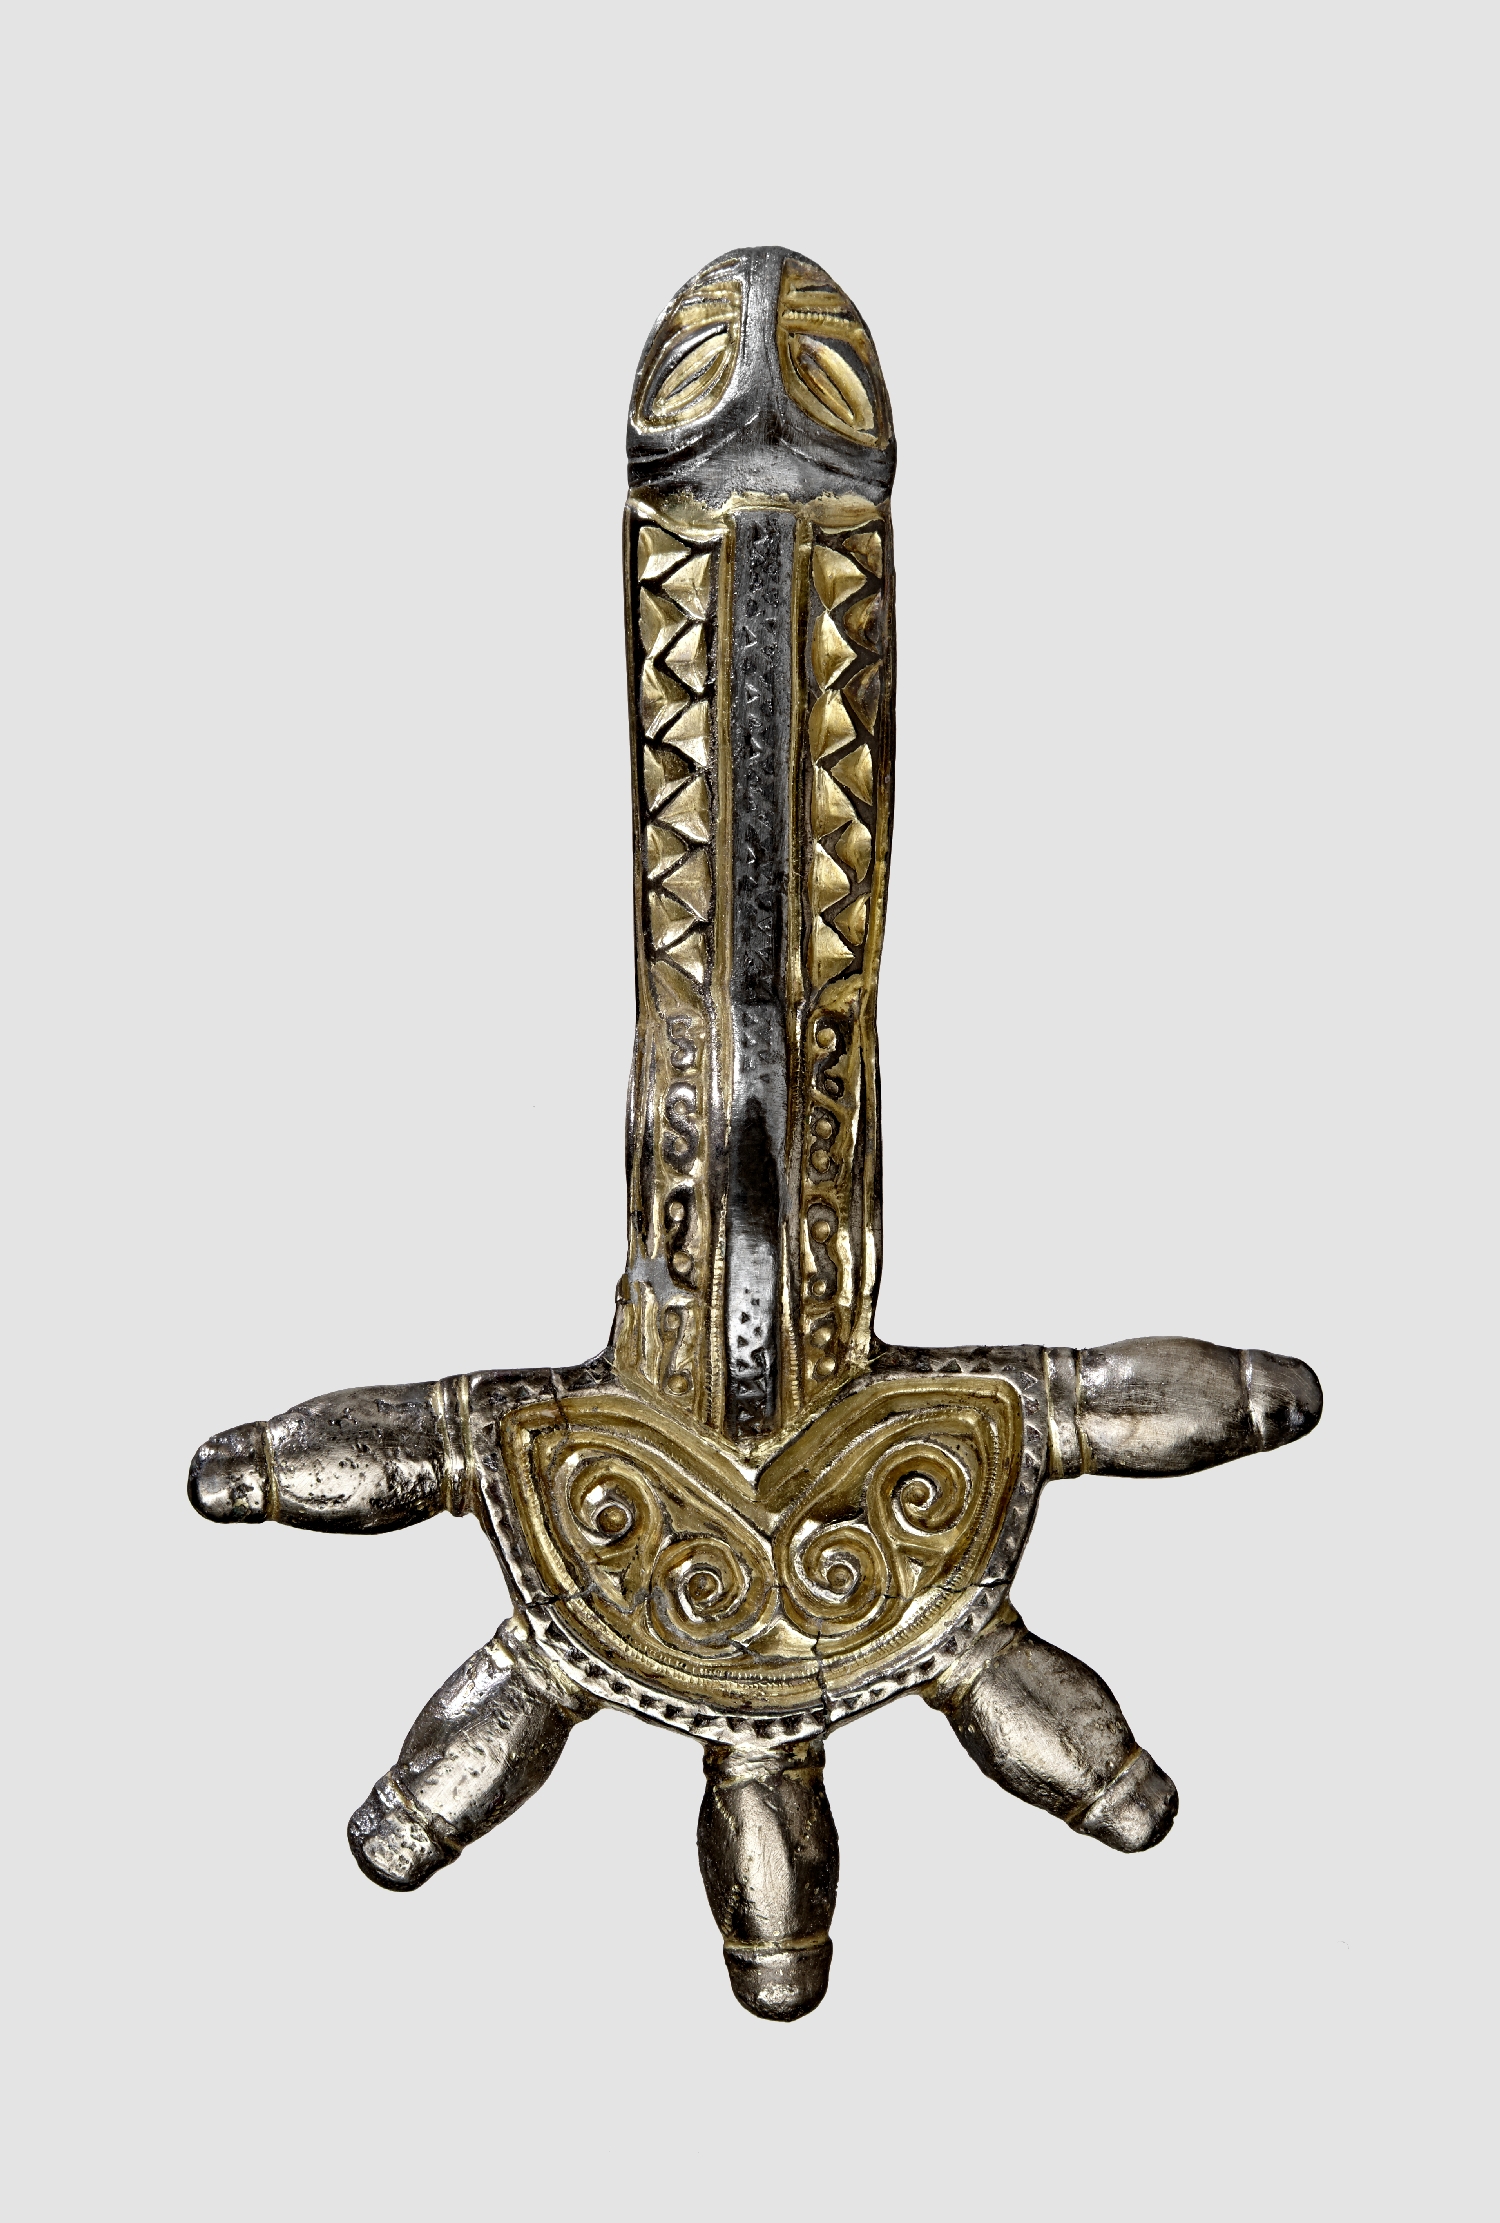 Bow brooch, discovery location: St. Georgen near Salzburg, Untereching, Early Middle Ages, 7th c., silver, gilt, inv. no. ARCH 9-89